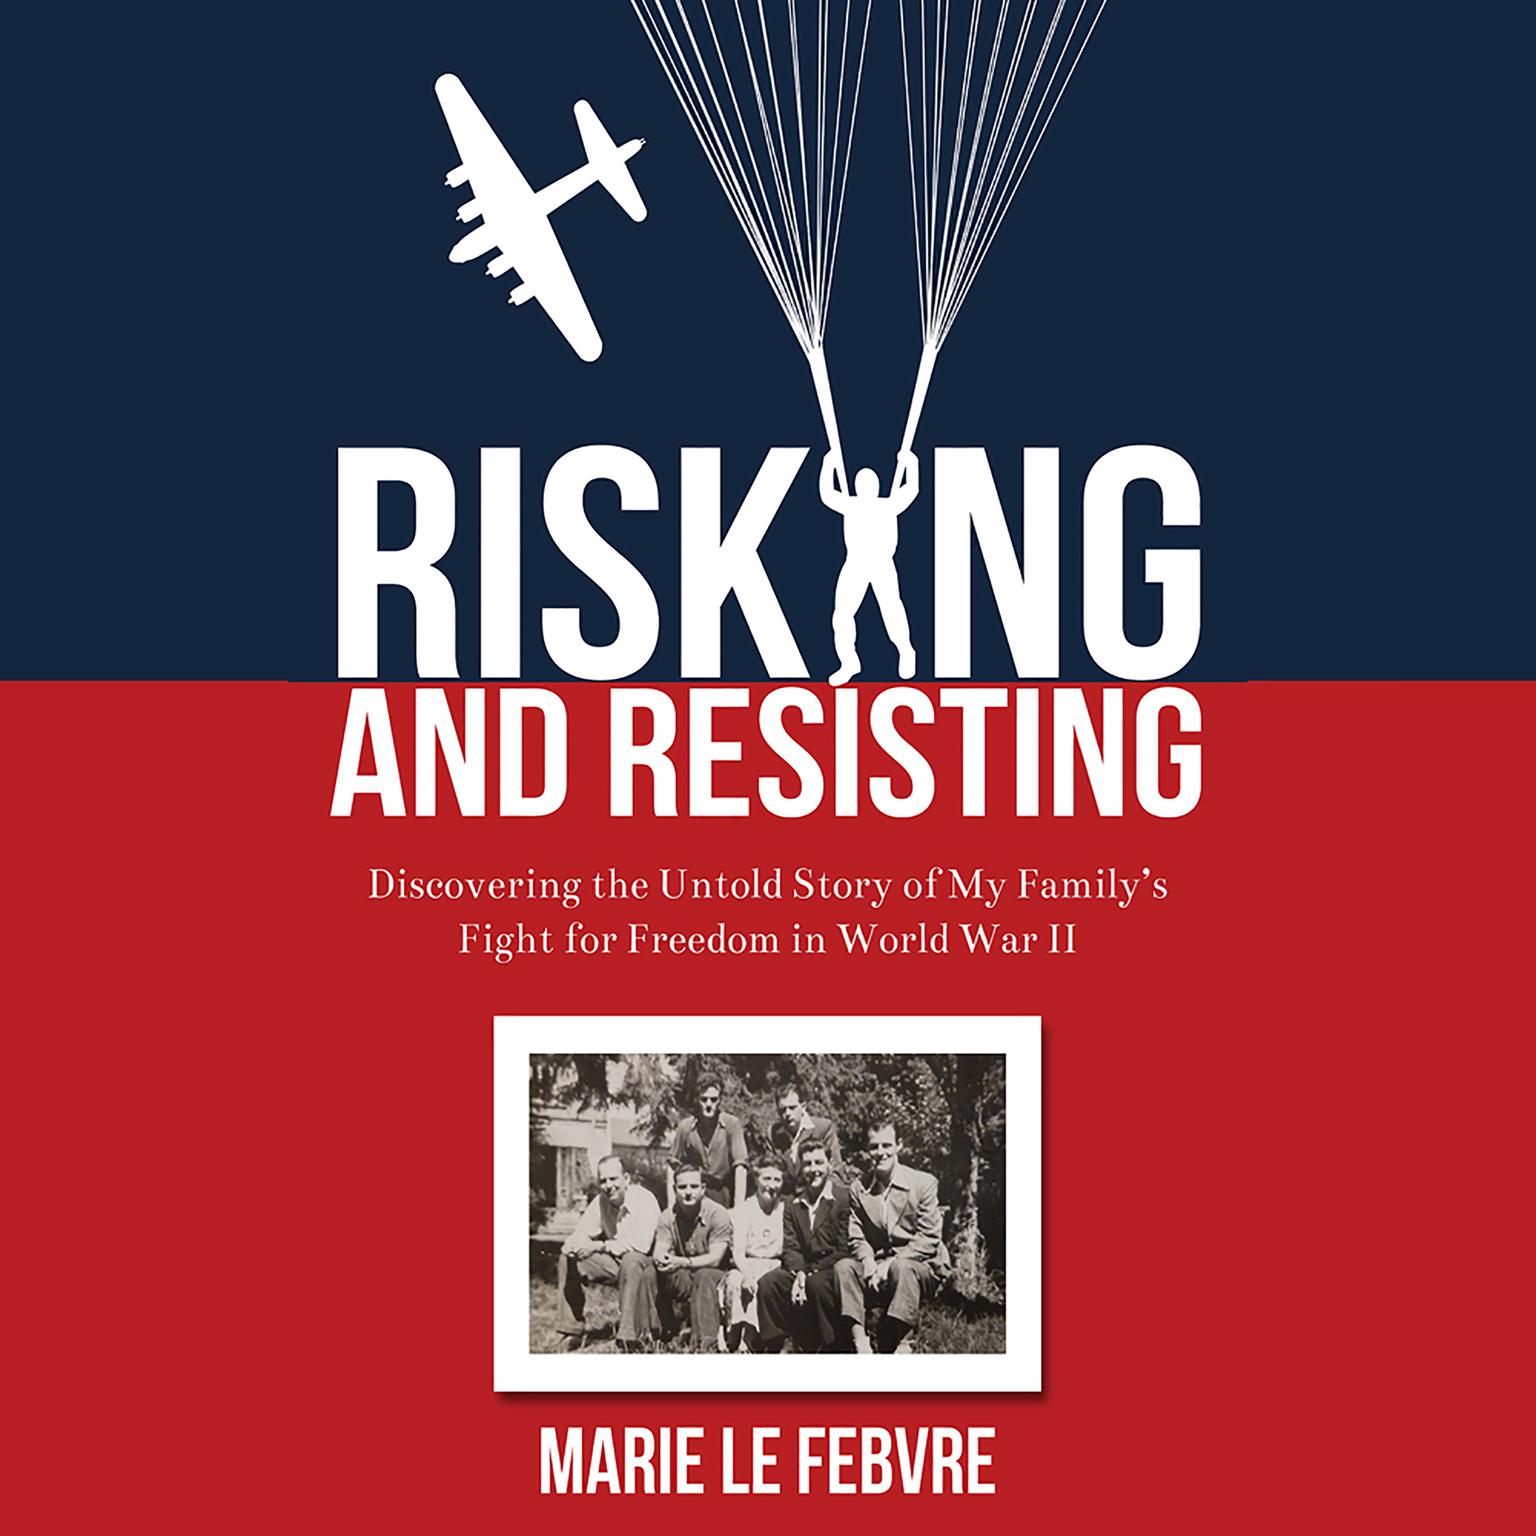 Risking and Resisting: Discovering the Untold Story of My Family’s Fight for Freedom in World War II: Discovering the Untold Story of My Family’s Fight for Freedom in World War II Audiobook, by Marie LeFebvre